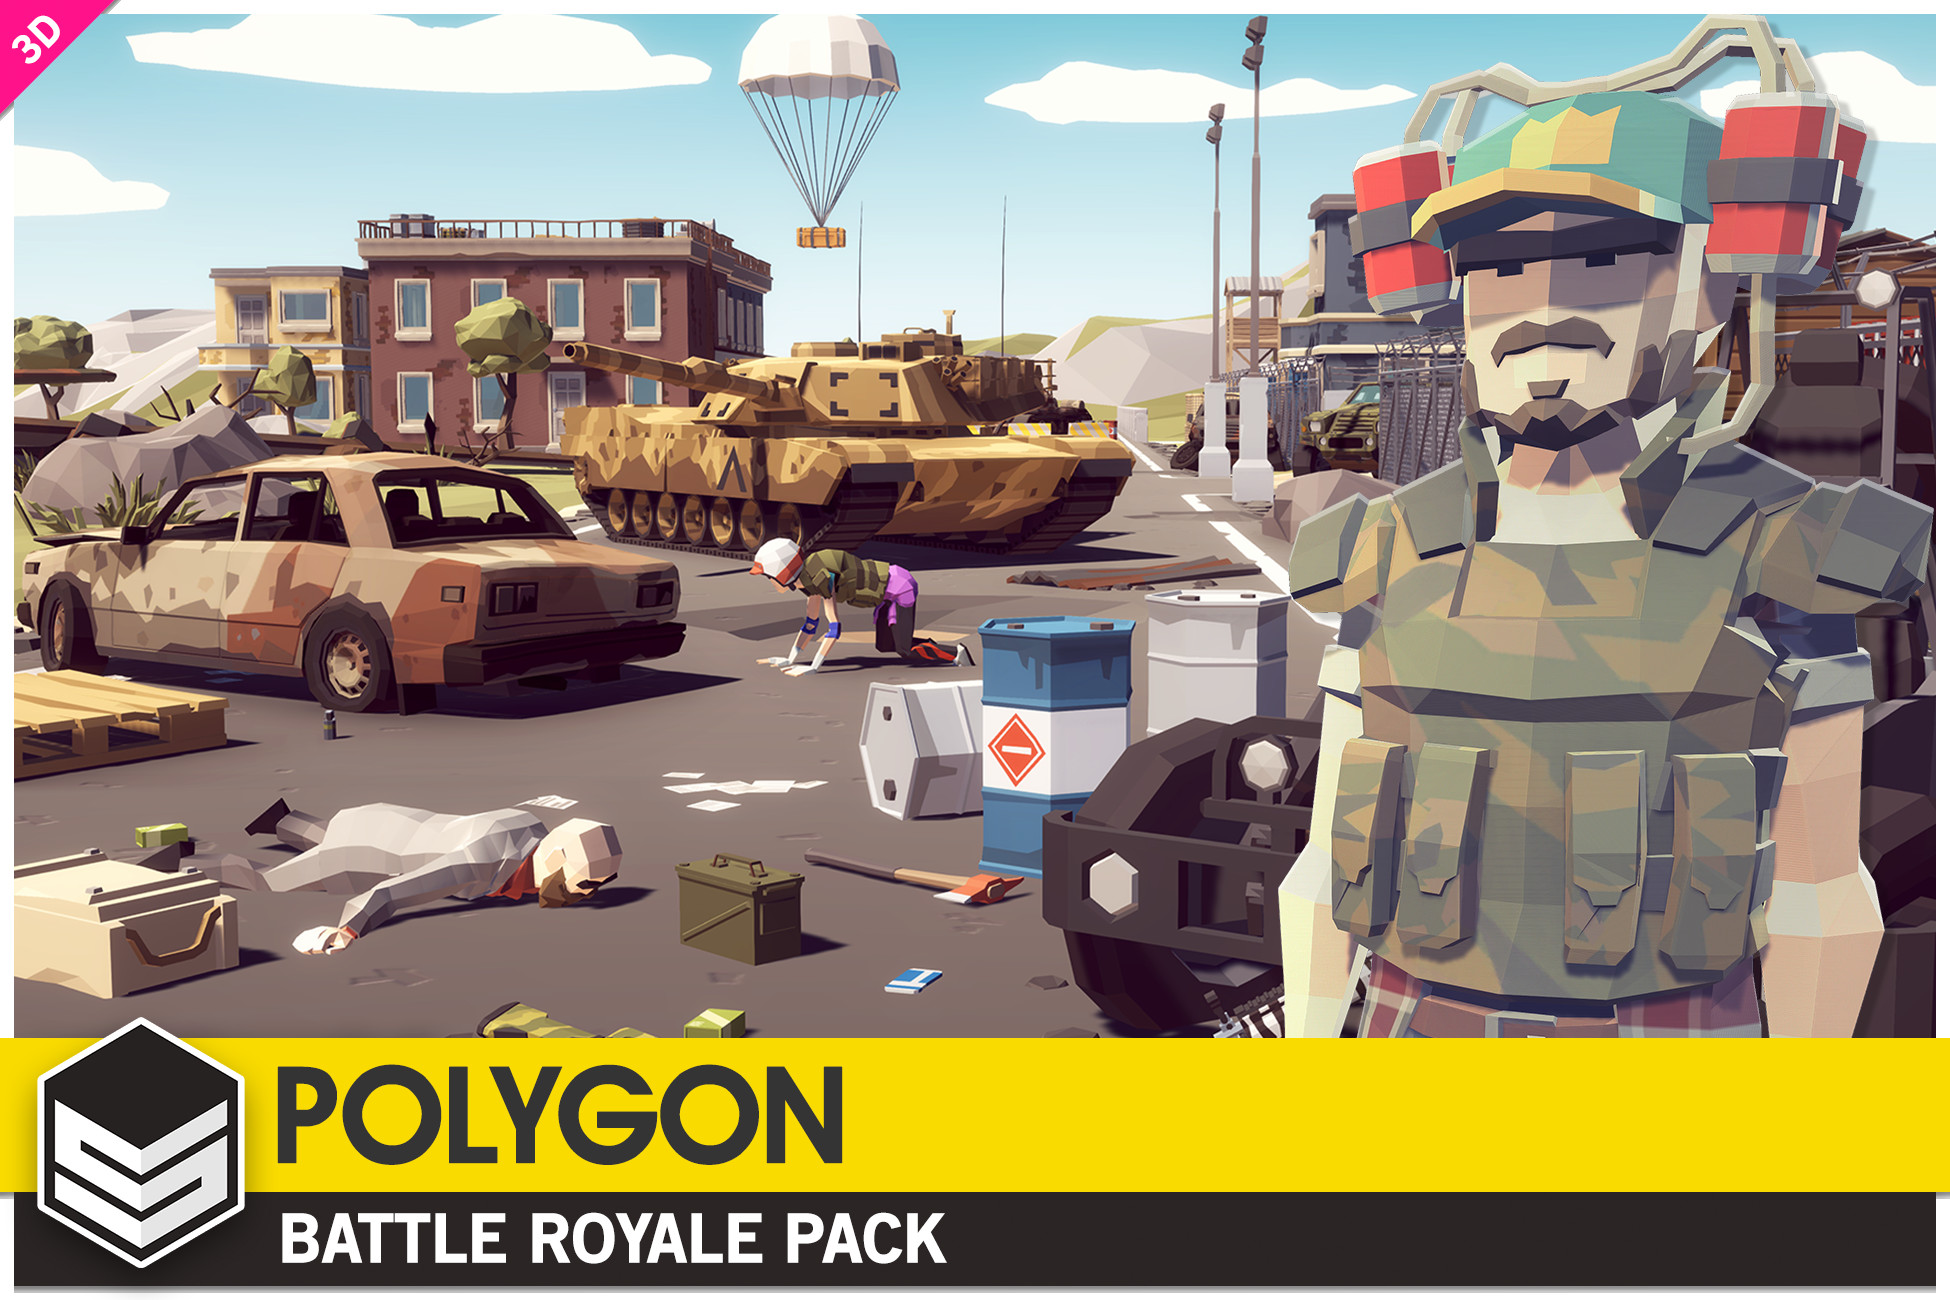 create your very own battle royale style low poly stylized game in the unity engine